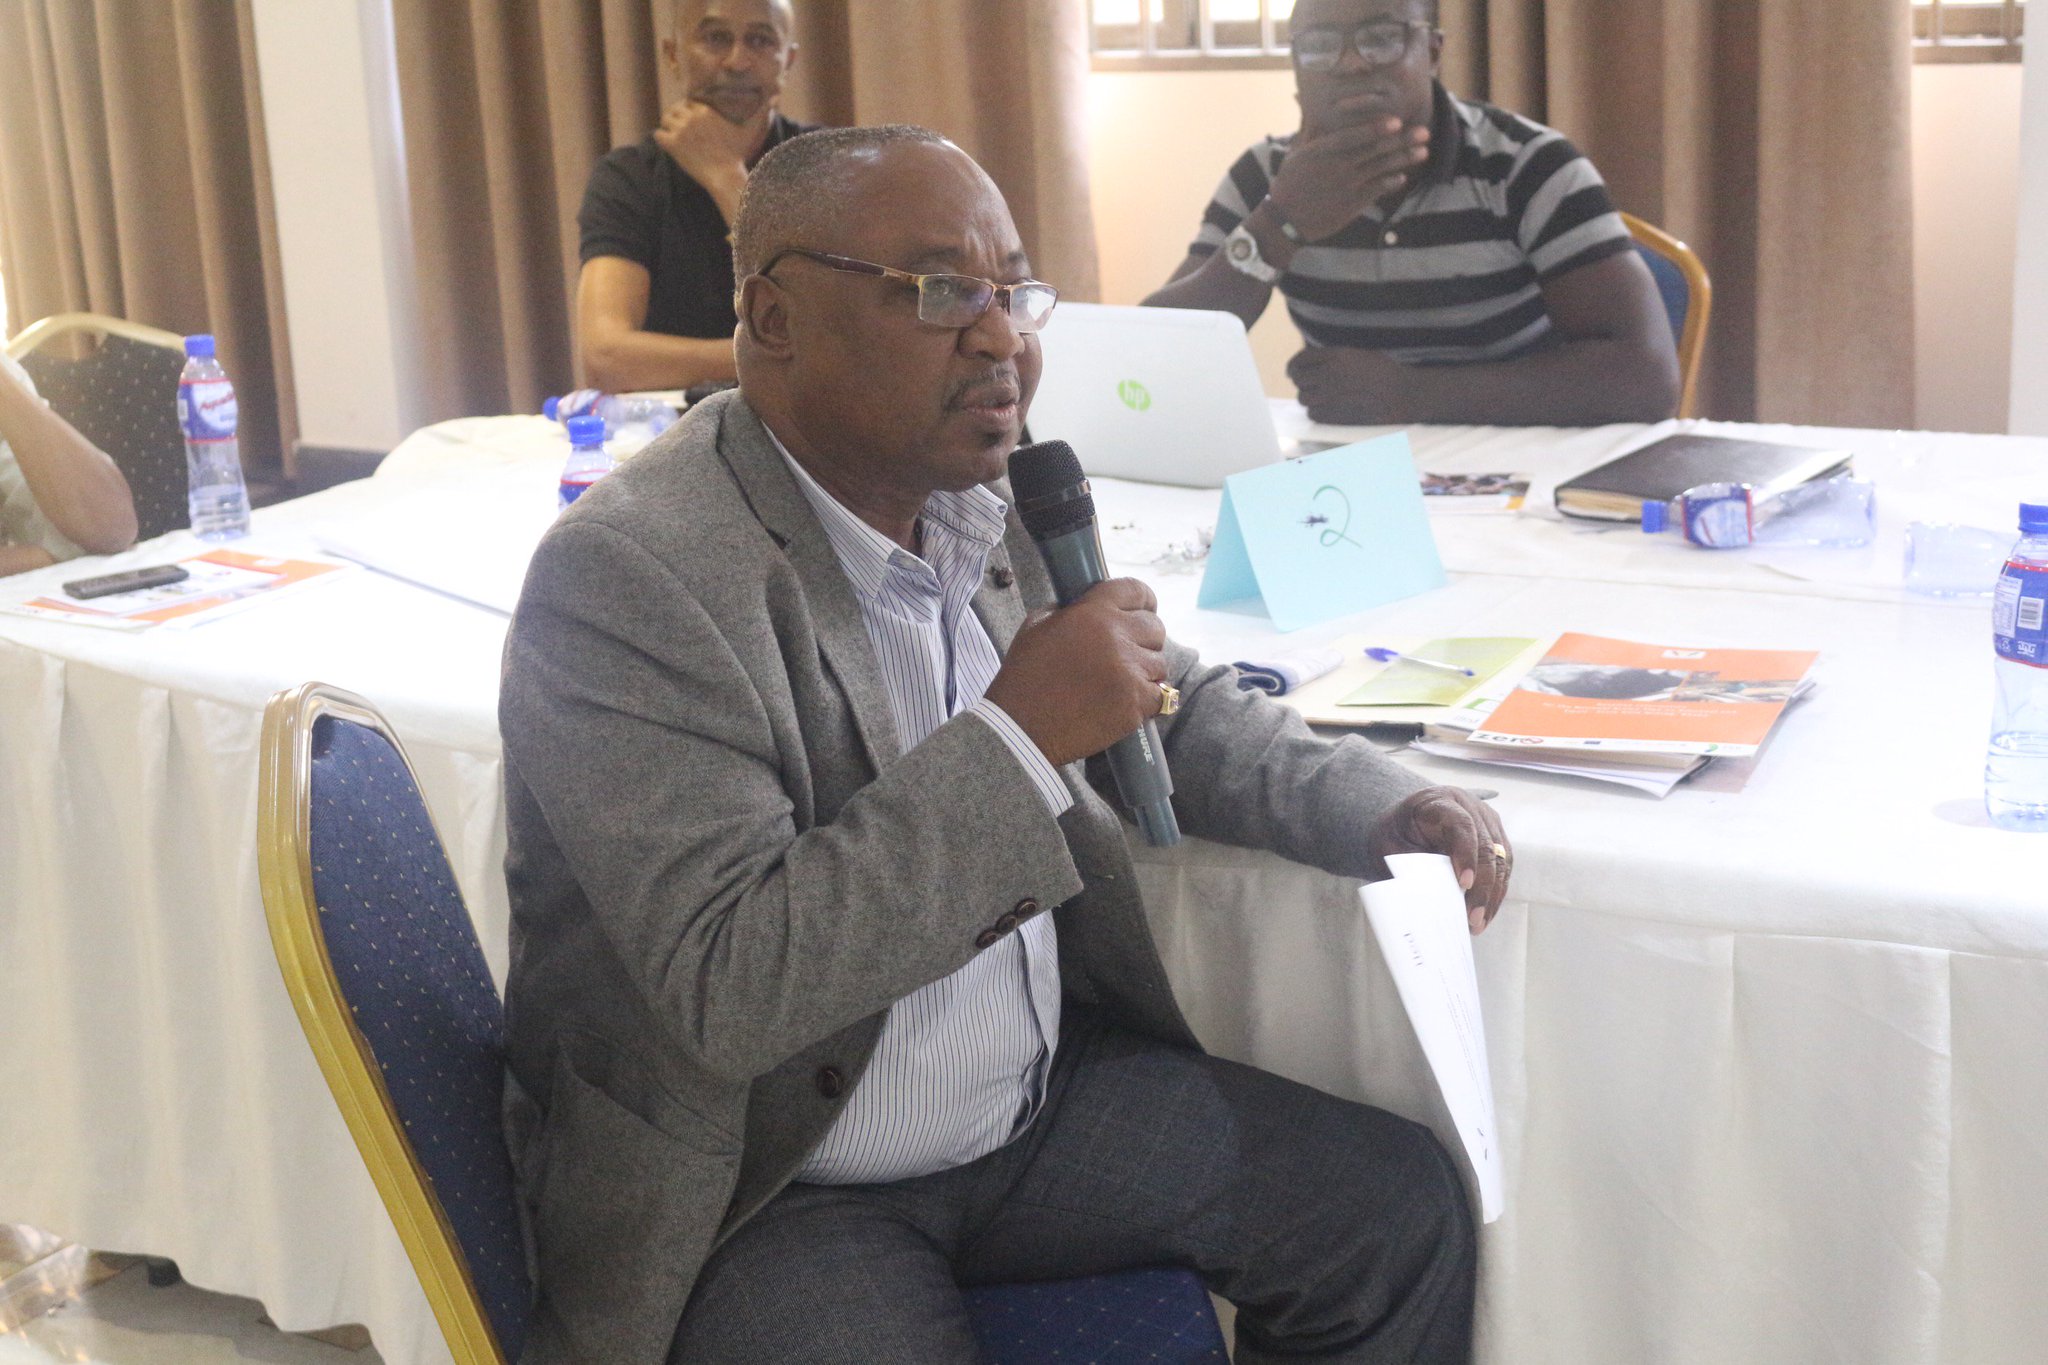 "Issuing of ASM license doesn't go beyond 90days if applicants provide all necessary documents" -Kofi Tetteh, MC
@IIED @fittwittar @gabyfz https://t.co/oDQsJwJVnx